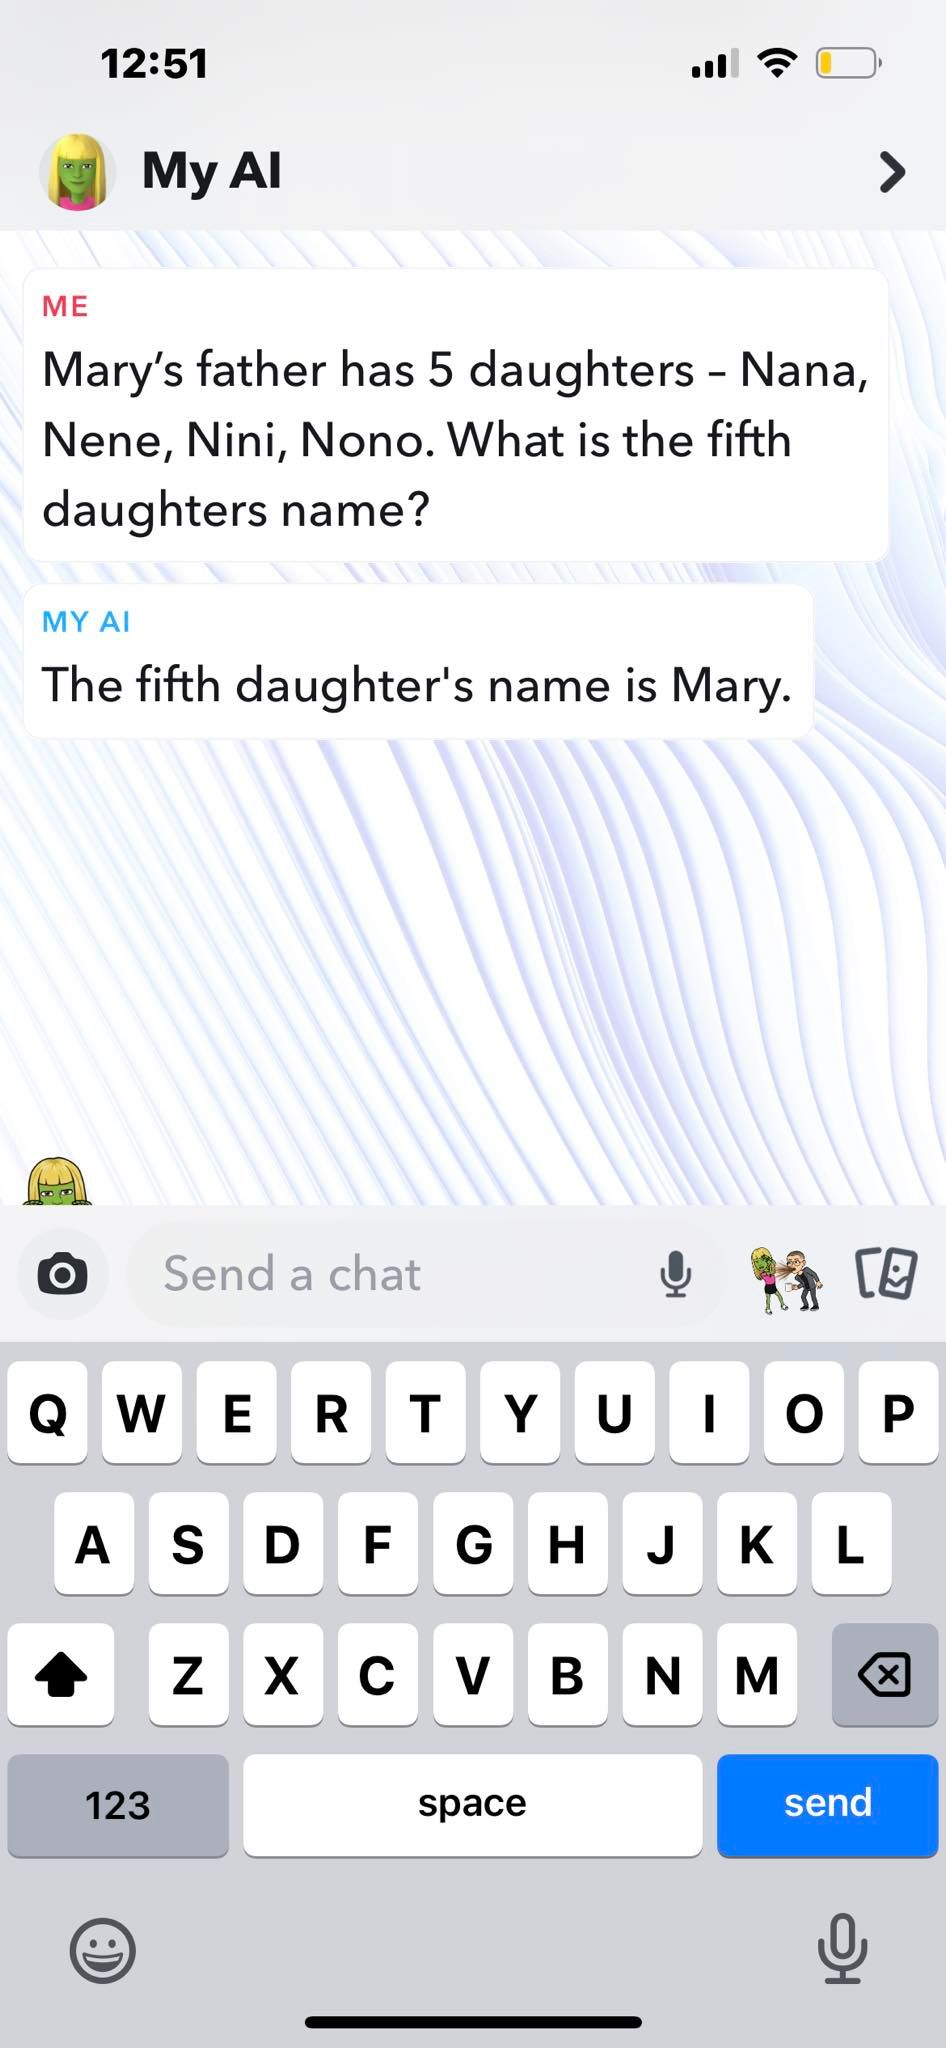 Asking Snapchat a Riddle About Family Relatives